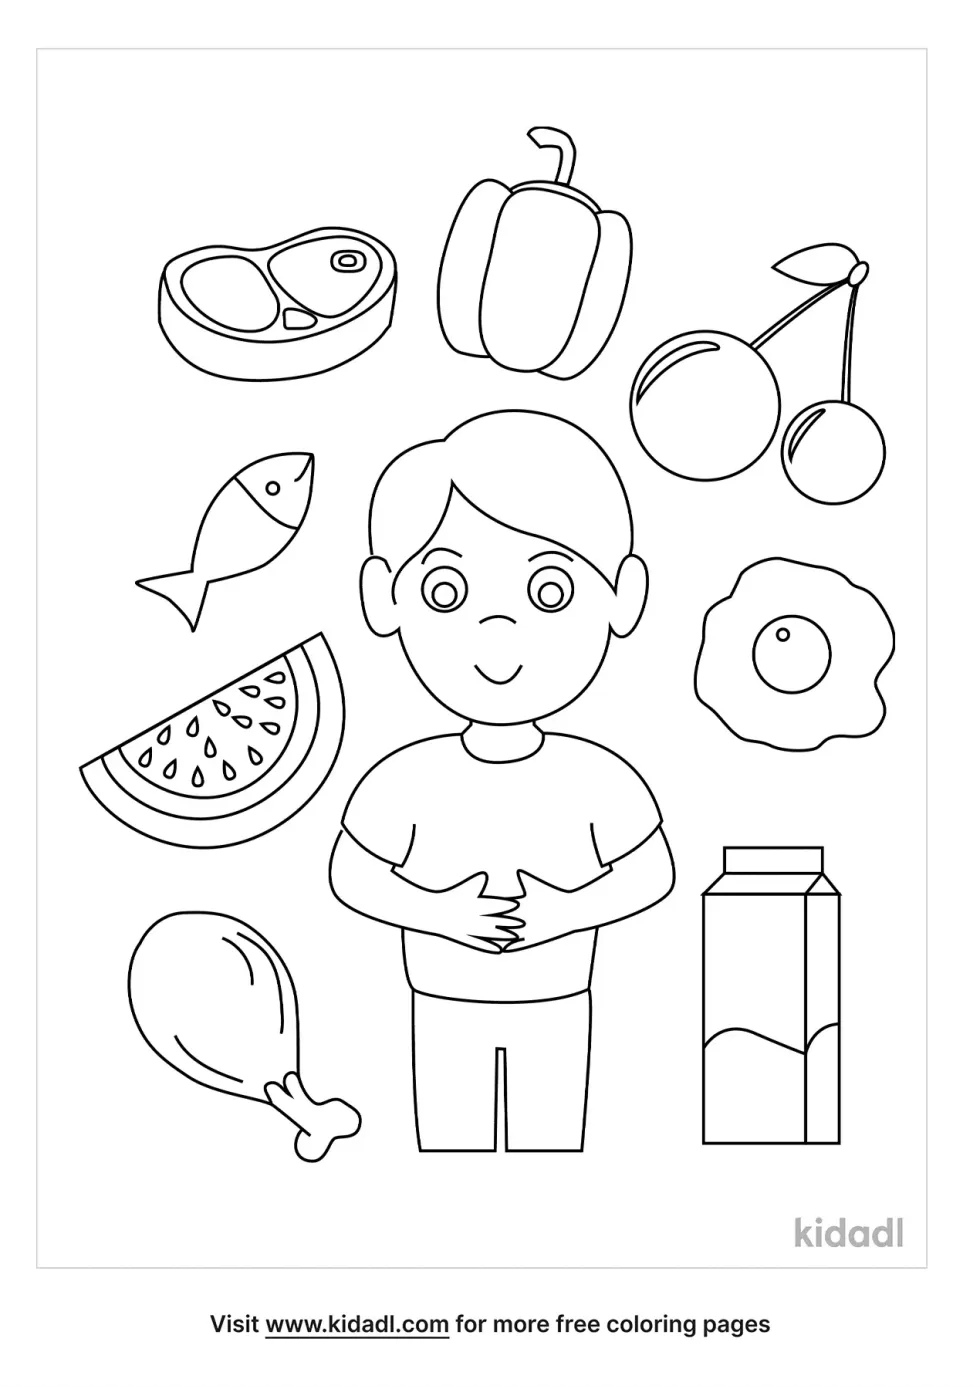 A Well Nourished Child Is A Healthy Child Coloring Page